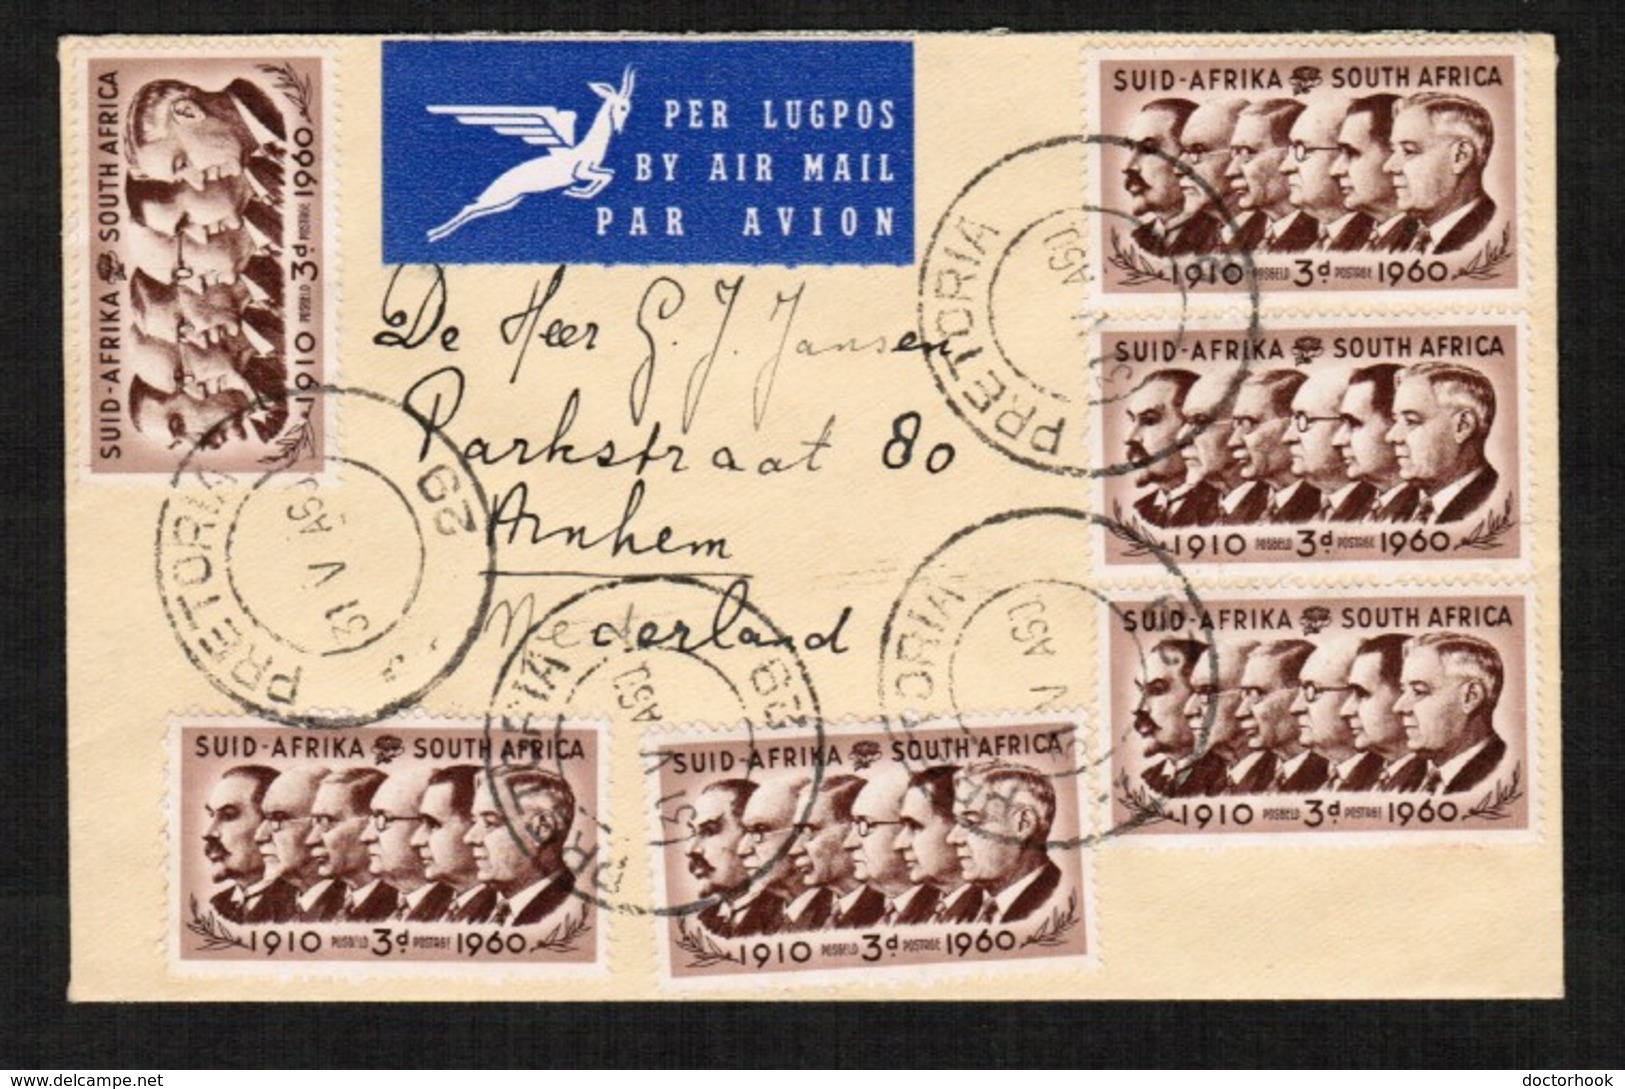 SOUTH AFRICA.   Scott # 235 (6) ON 1960 FIRST DAY COVER AIRMAIL To NETHERLANDS (31/18/1960) (OS-548) - FDC